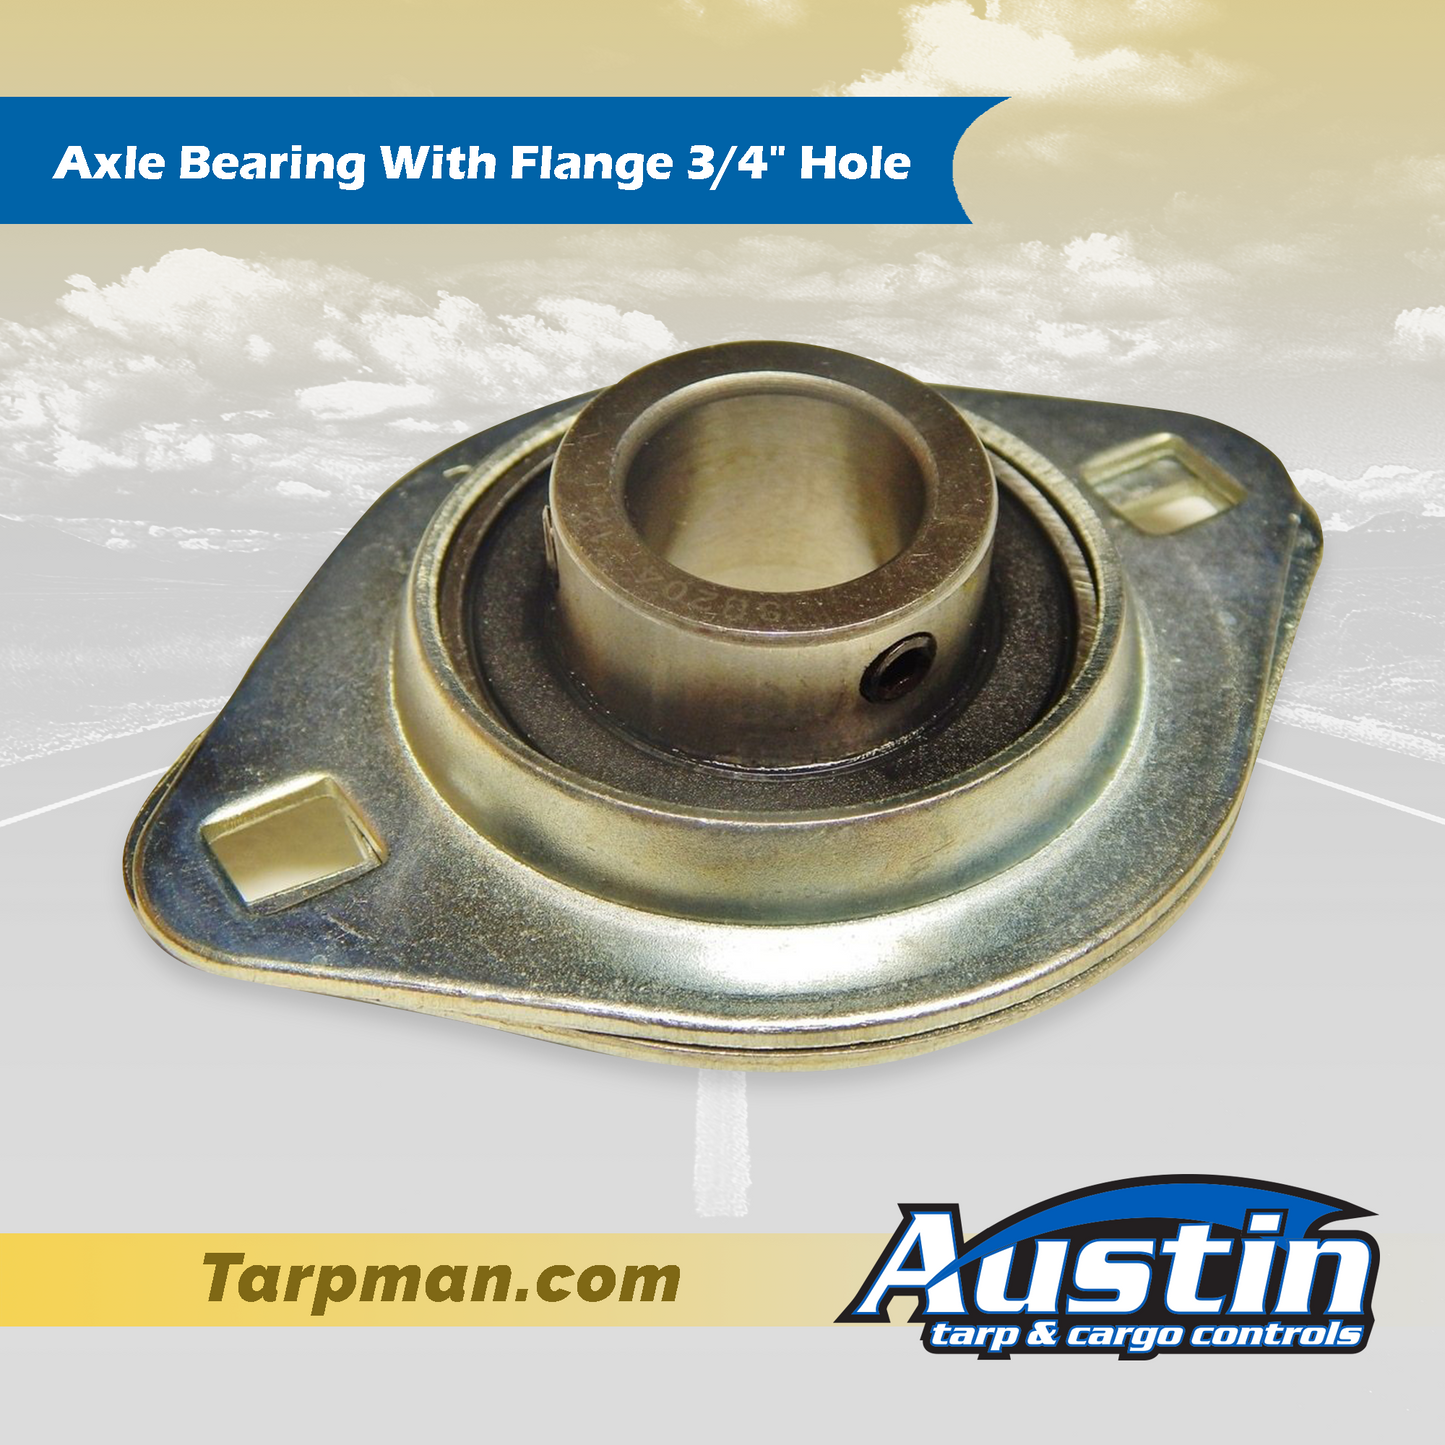 Axle Bearing With Flange 3/4" Hole